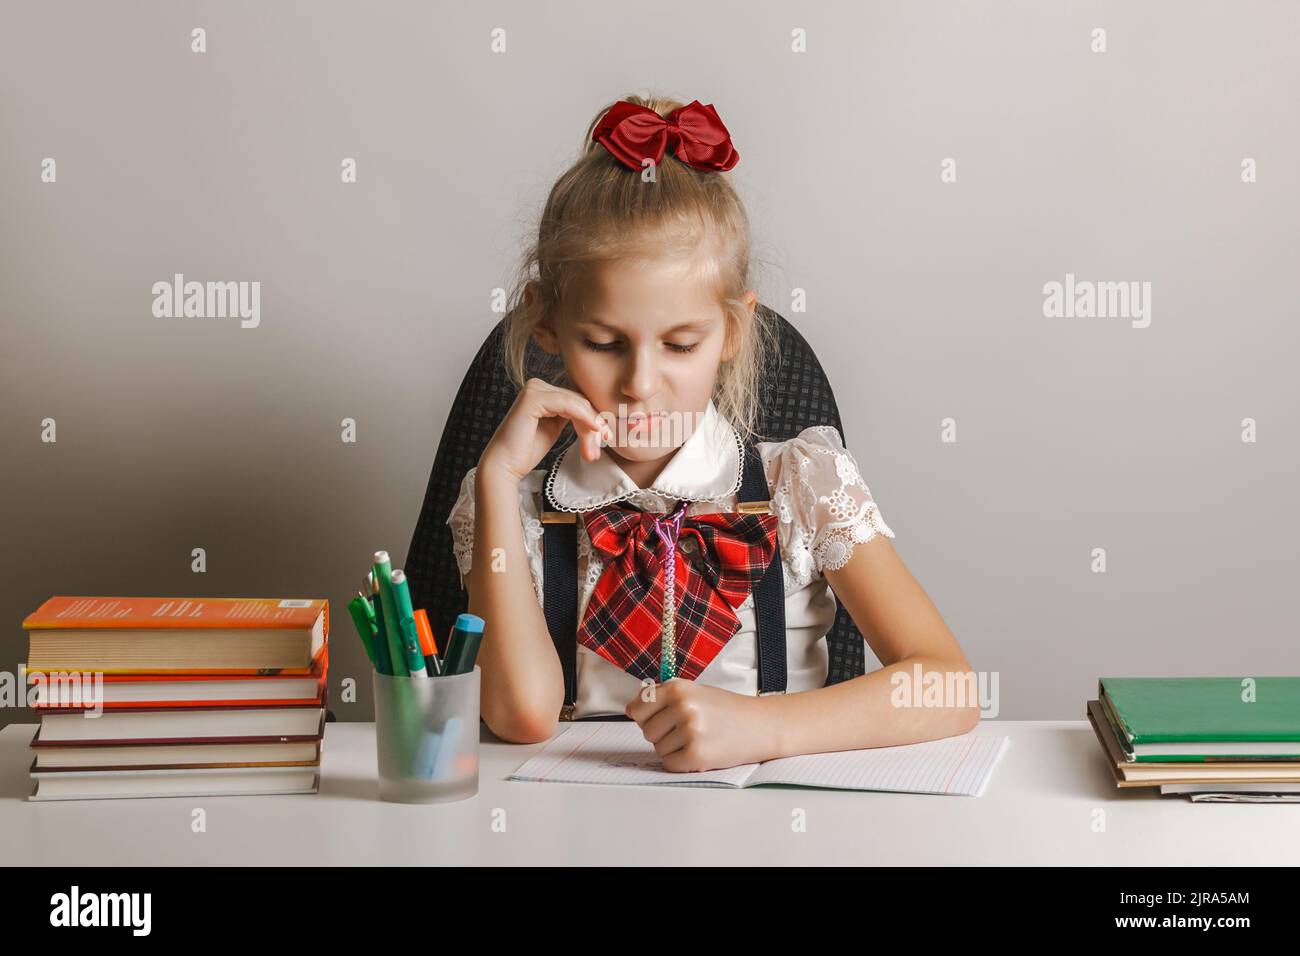 A little girl with a dissatisfied face in a school uniform draws in a notebook with her left hand, she does not like what she is doing. Stock Photo